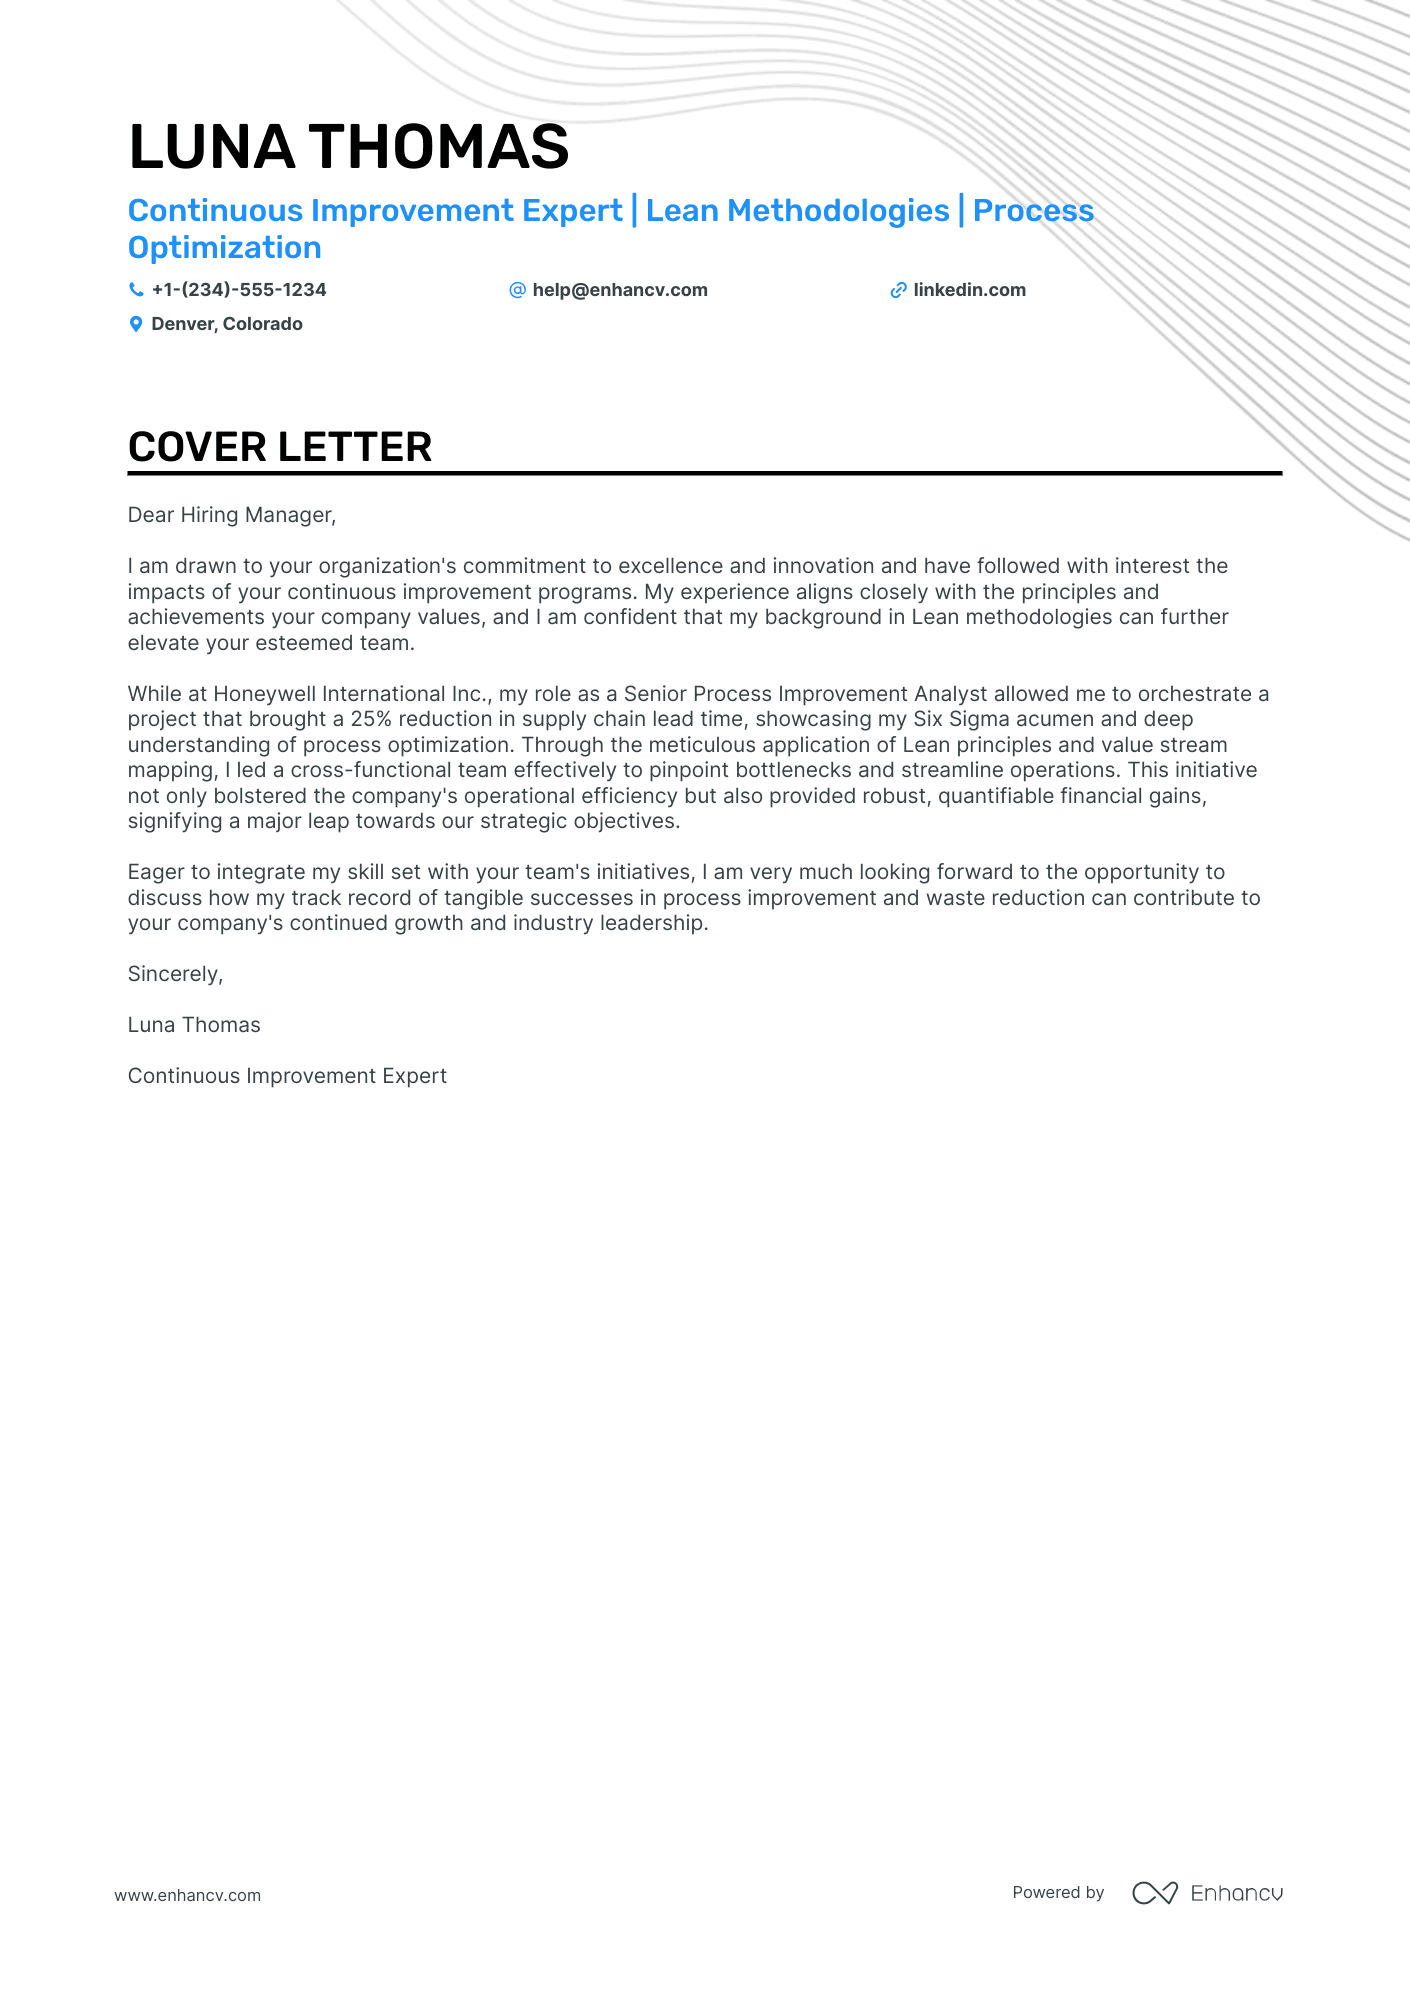 Continuous Improvement Manager cover letter